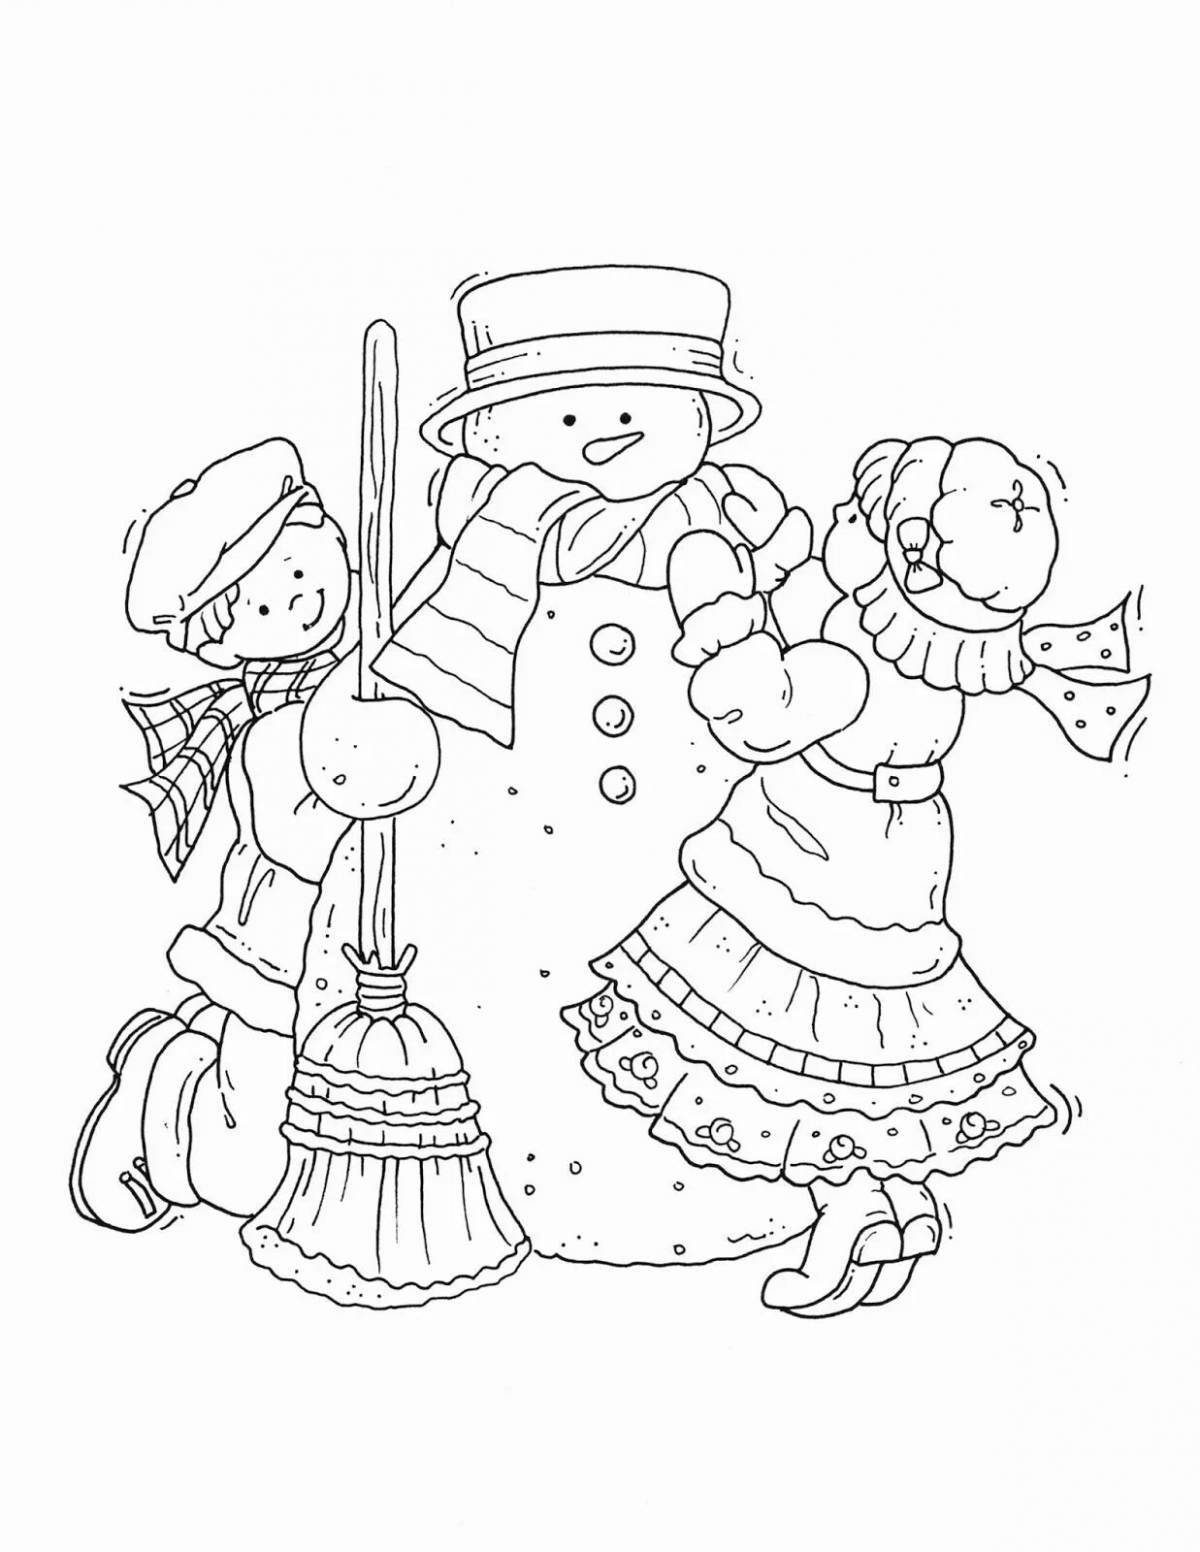 Holiday coloring-carols for children 4-5 years old